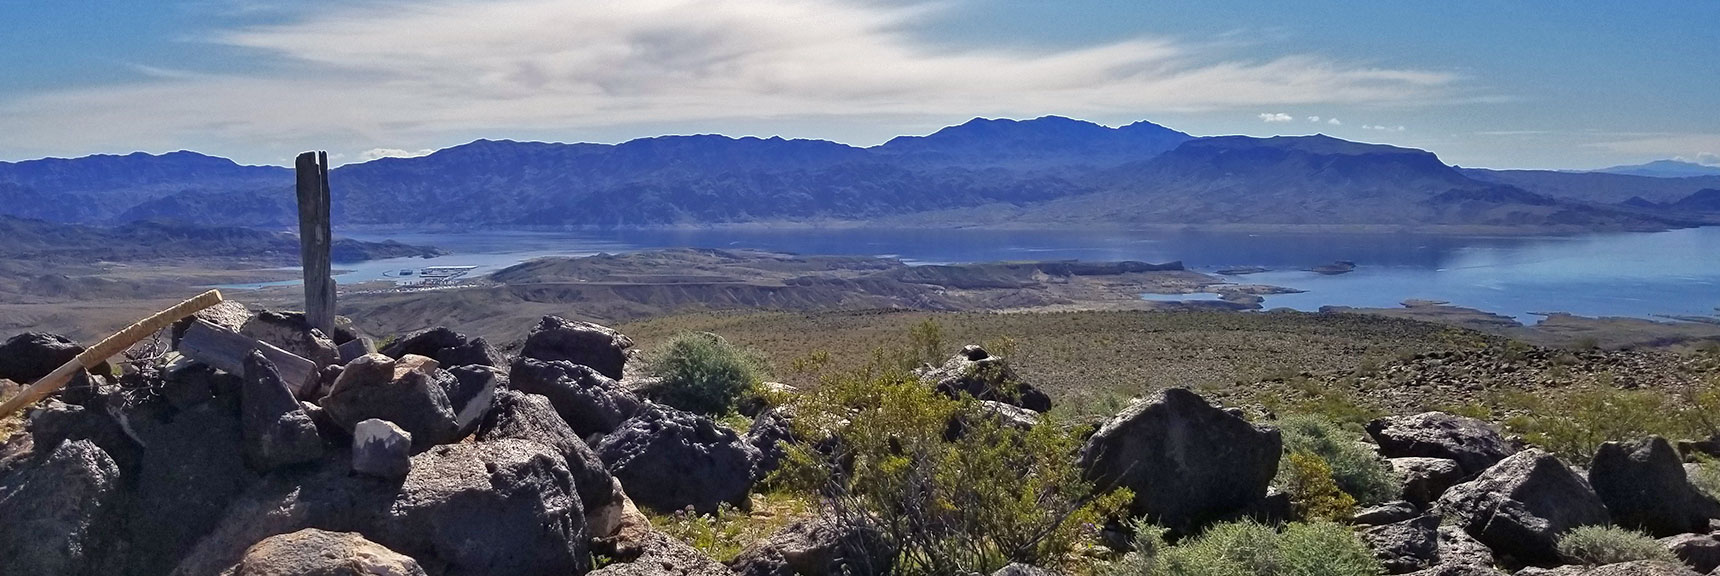 View of Lake Mead from Black Mesa in Lake Mead National Recreation Area, Nevada